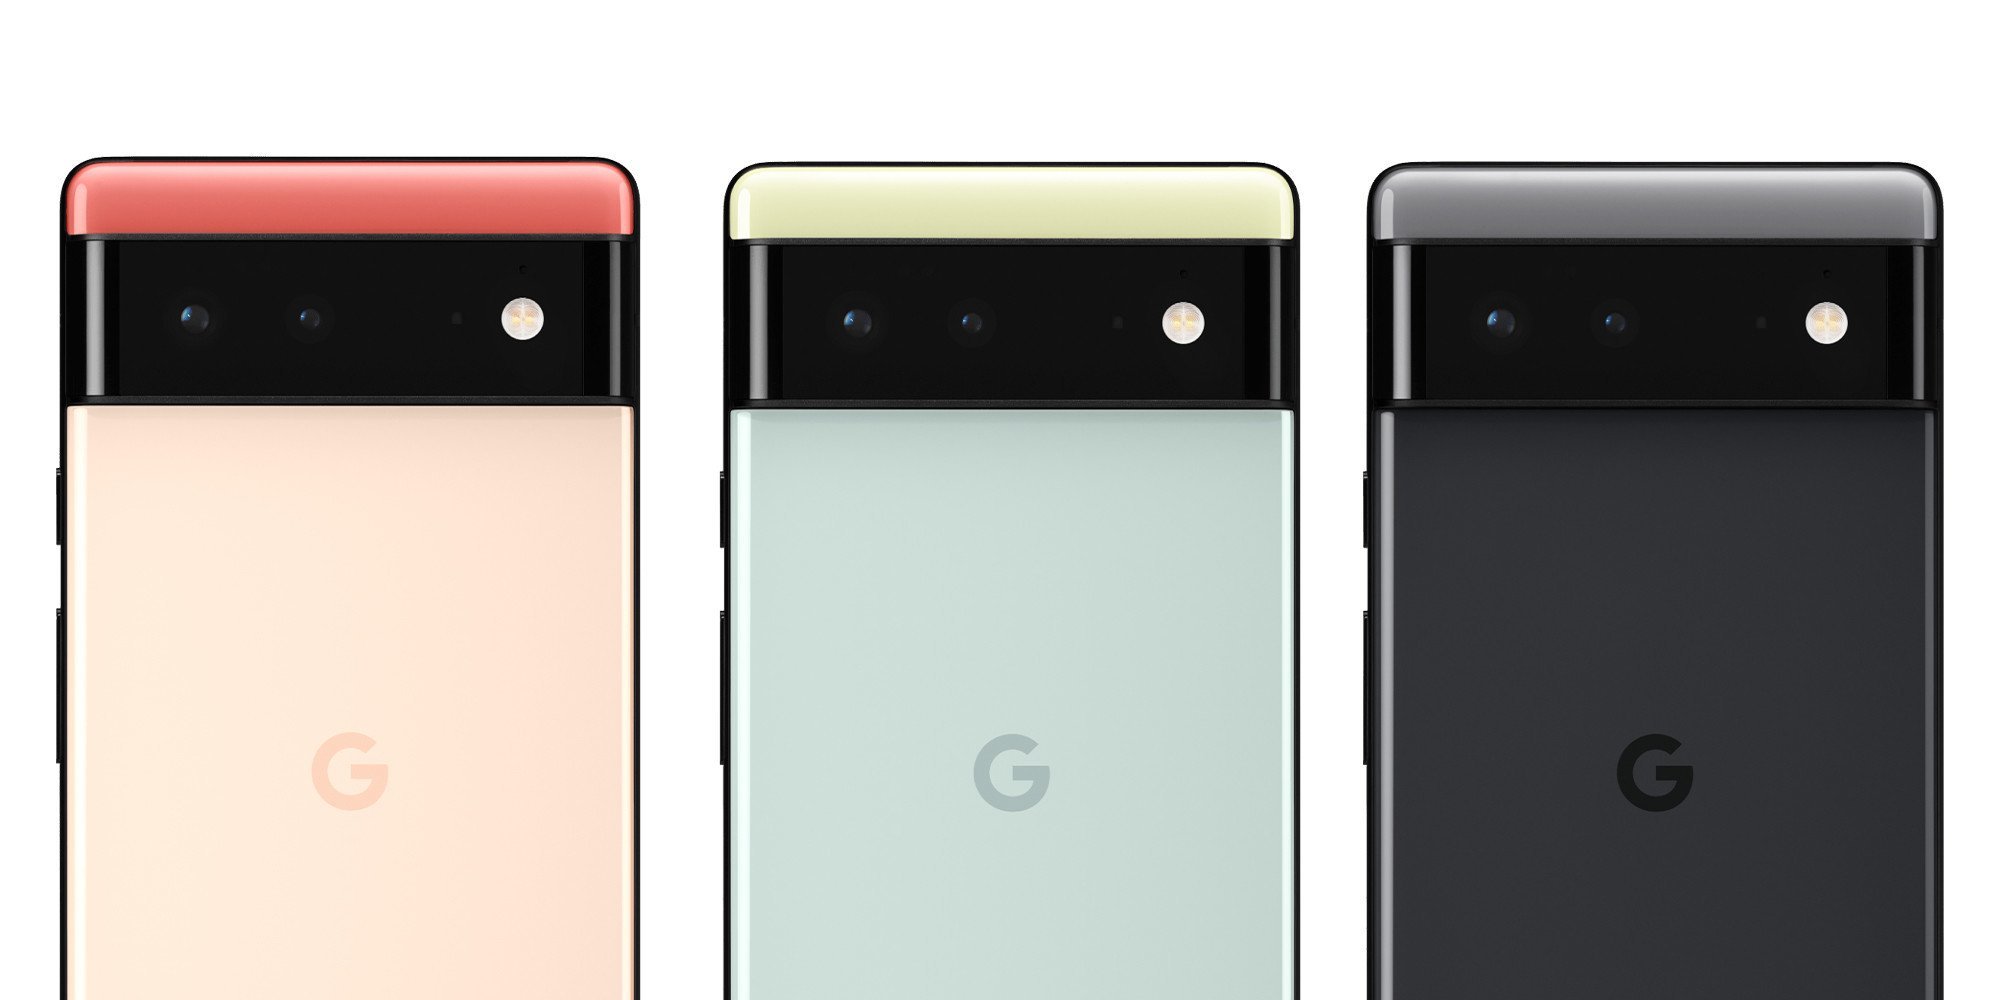 The new functionality of Google Camera will appear on the "pixels" of past generations